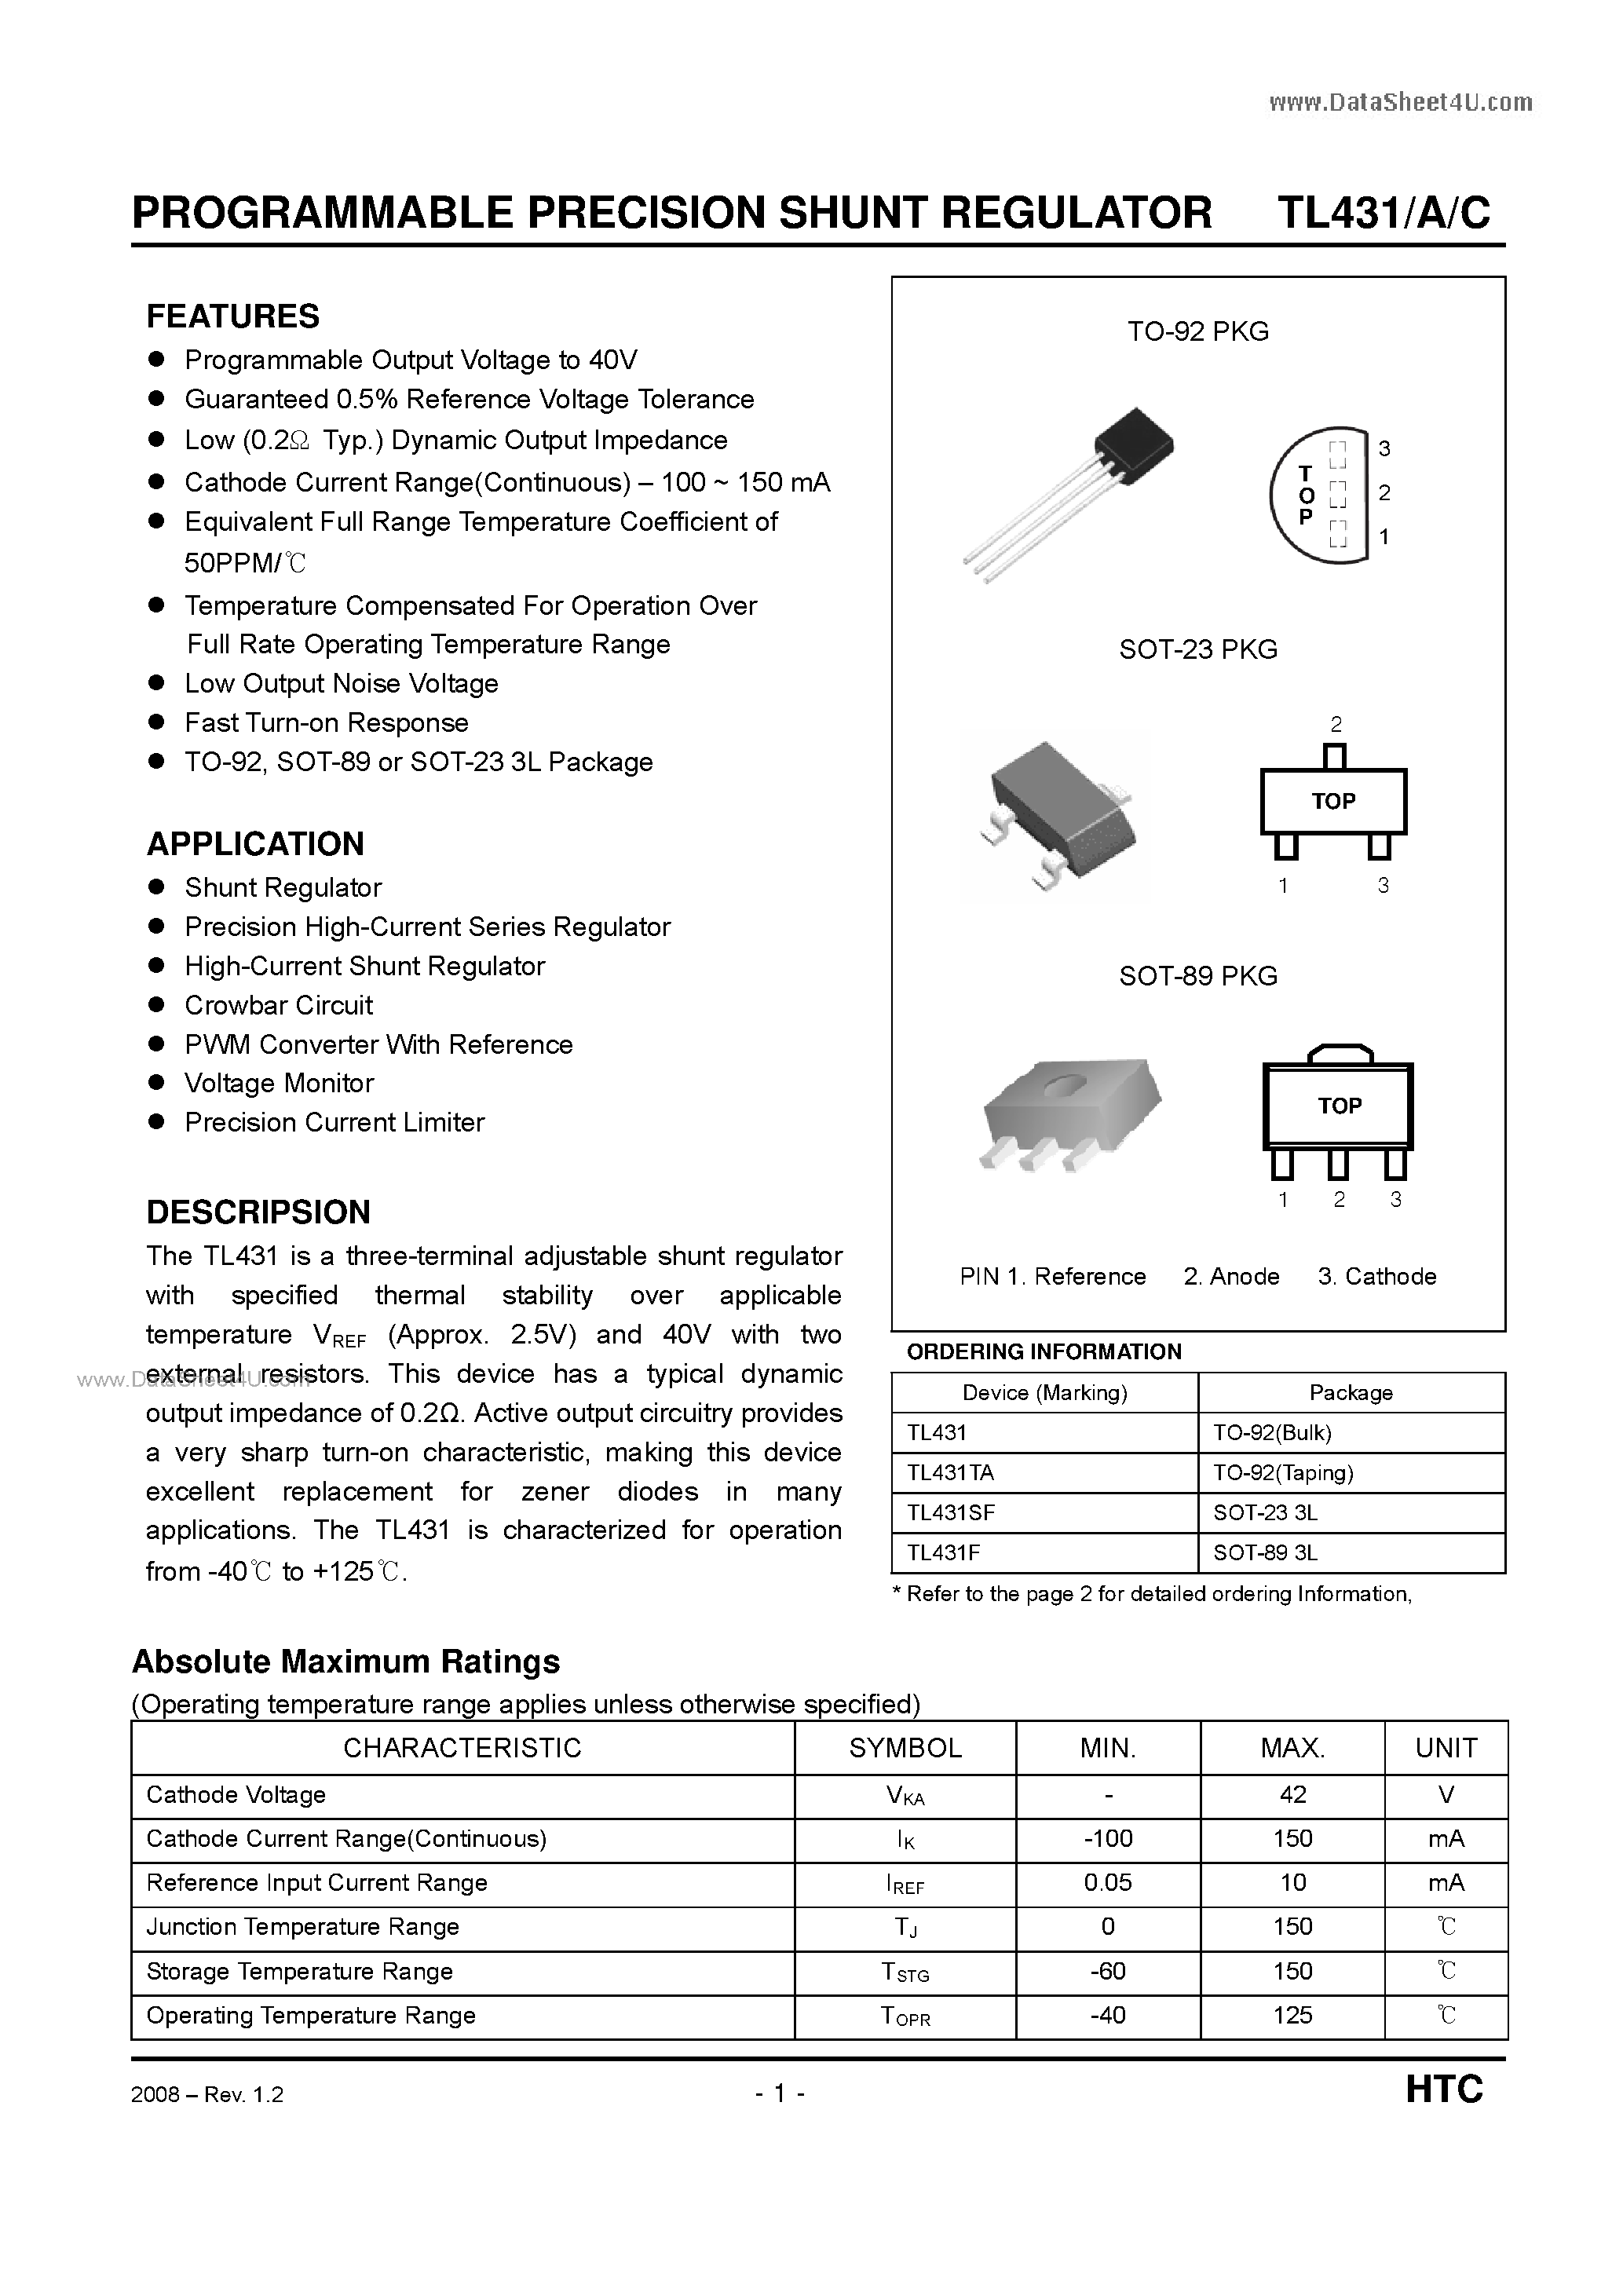 Datasheet TL431 - Programmable Output Voltage to 40V page 1